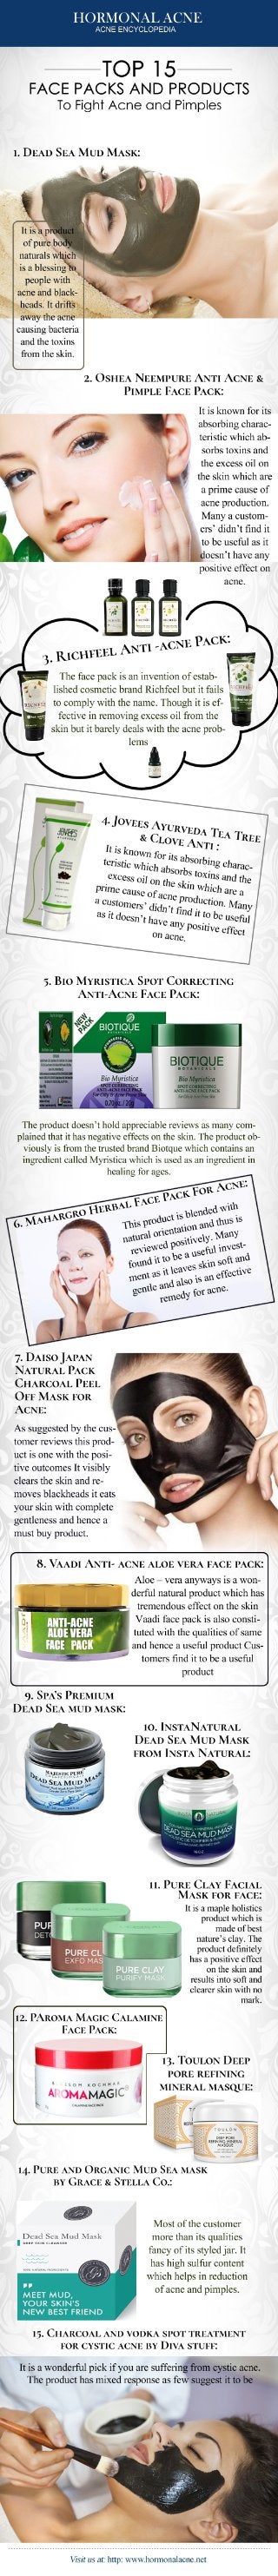 Top 15 Face Packs And Products To Fight Acne and Pimples